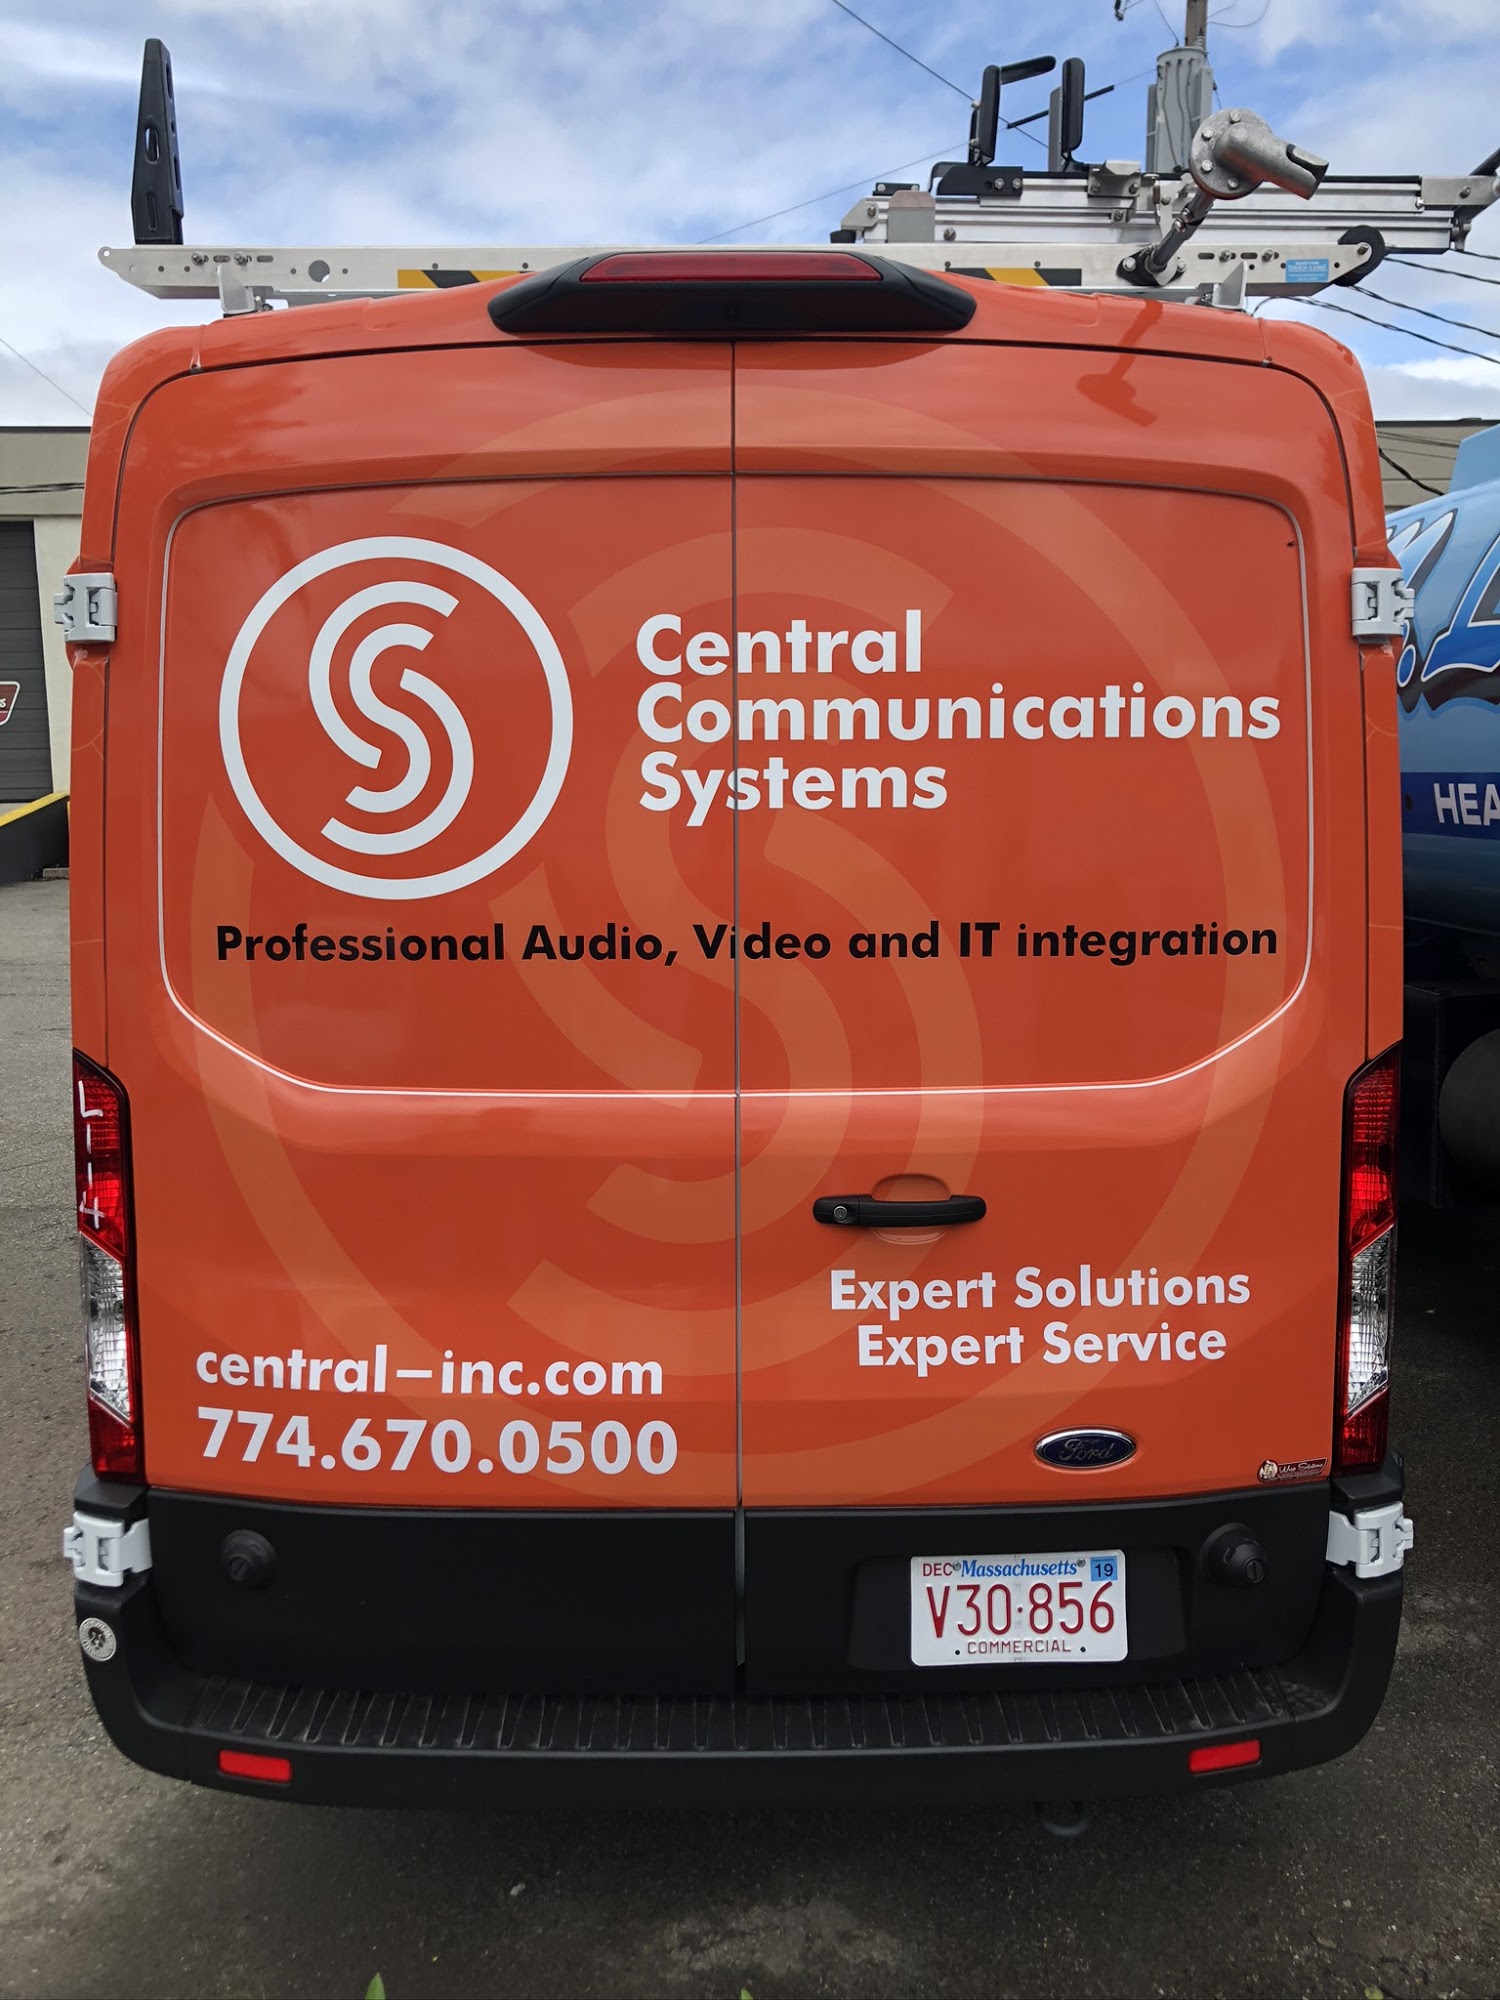 Central Communications Systems, Inc.